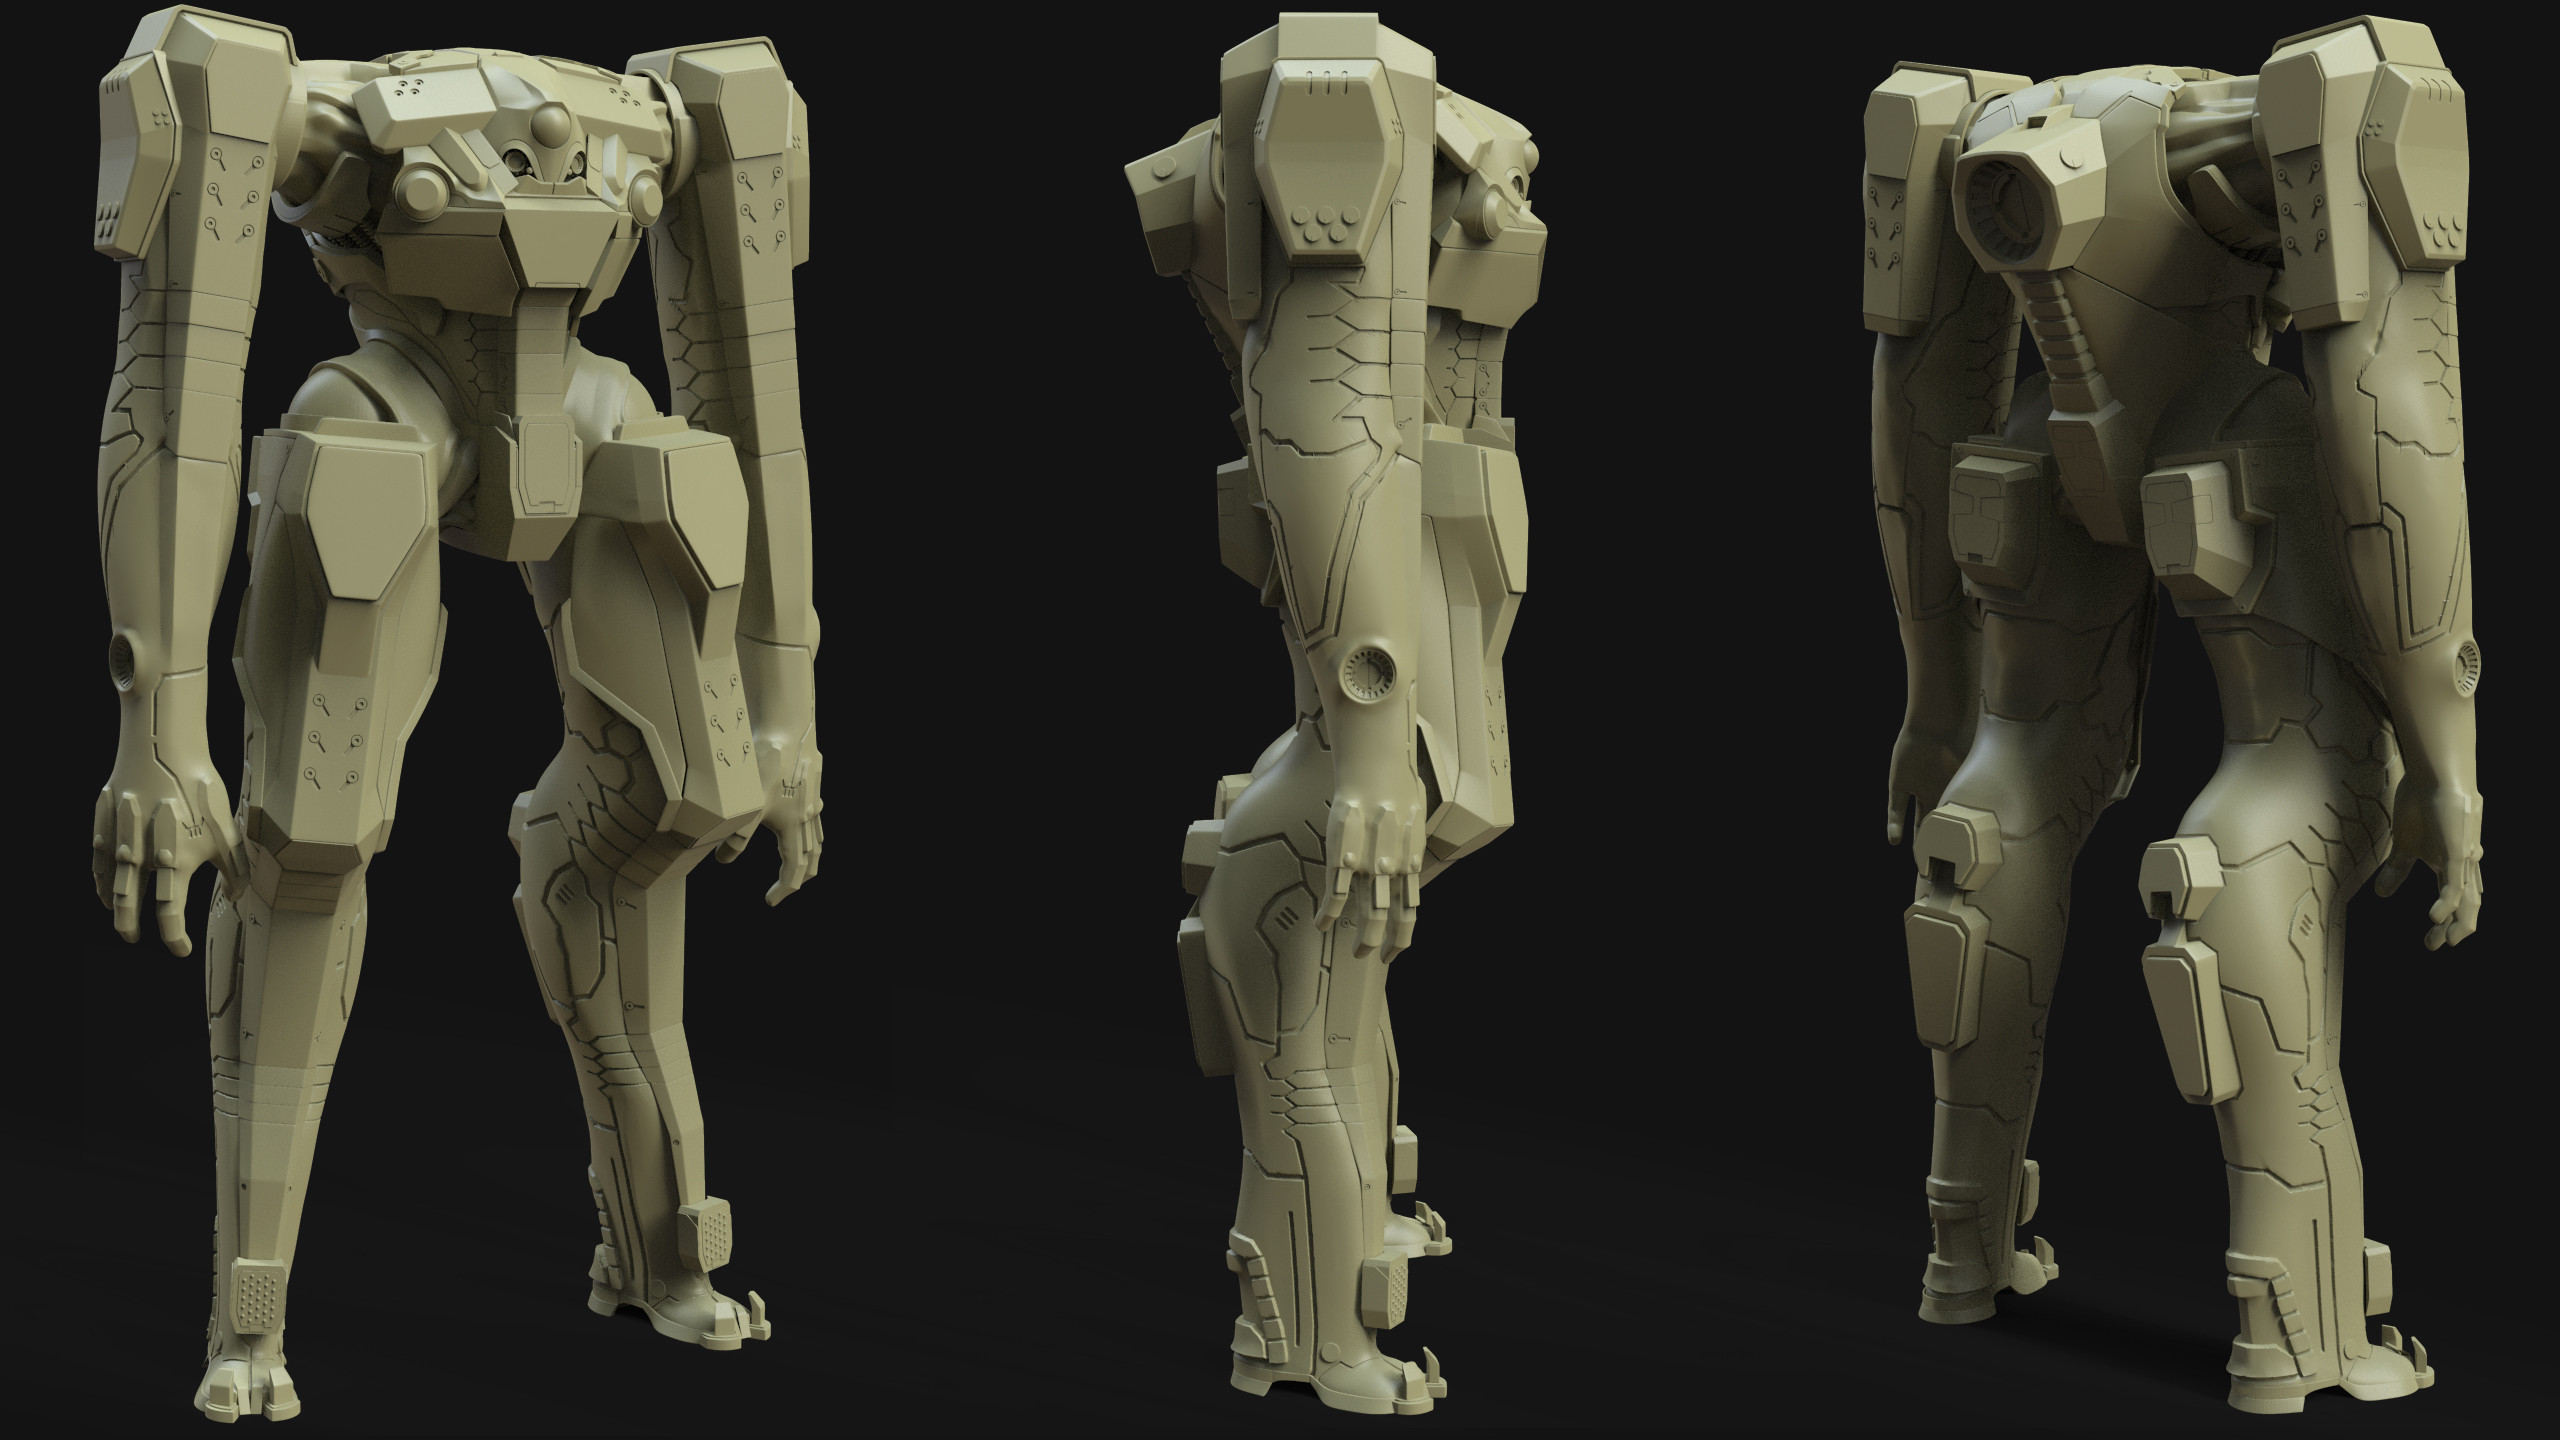 Mech model, never fully fleshed out the original design or parts. It has potential maybe one day I will revisit it.